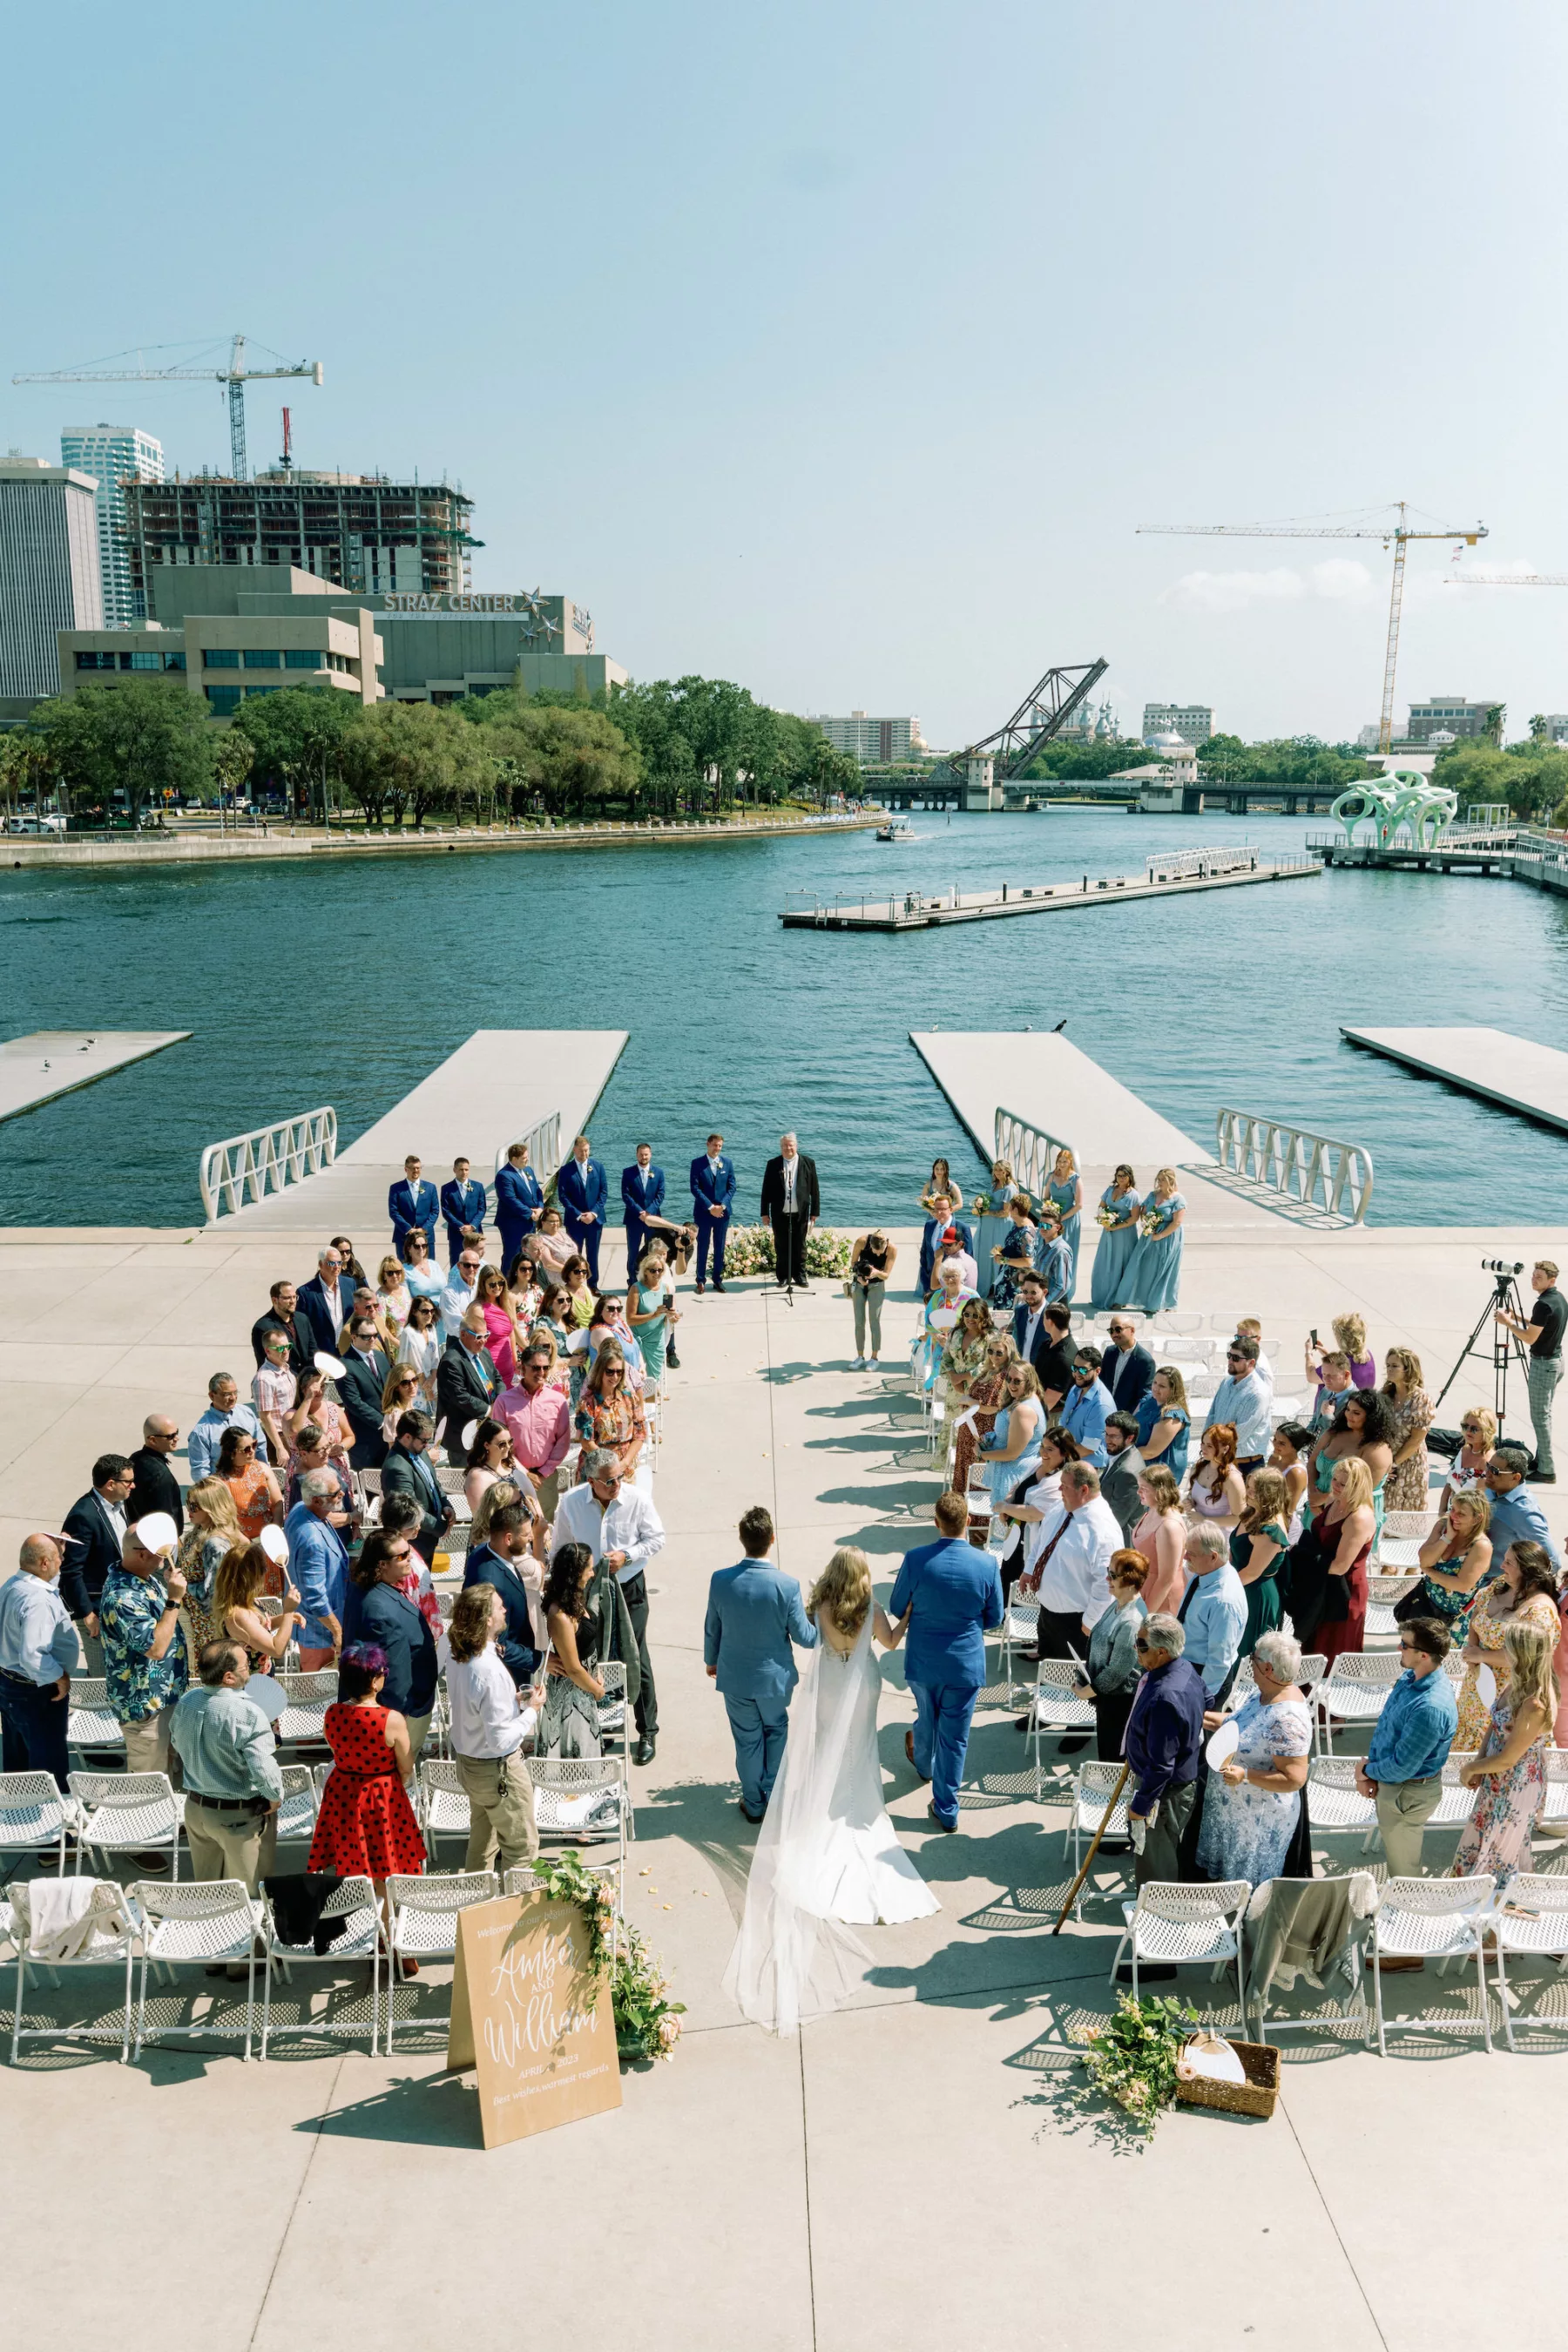 Romantic Outdoor Riverfront Wedding Ceremony Inspiration | Tampa Bay Planner Wilder Mind Events | Venue Tampa River Center